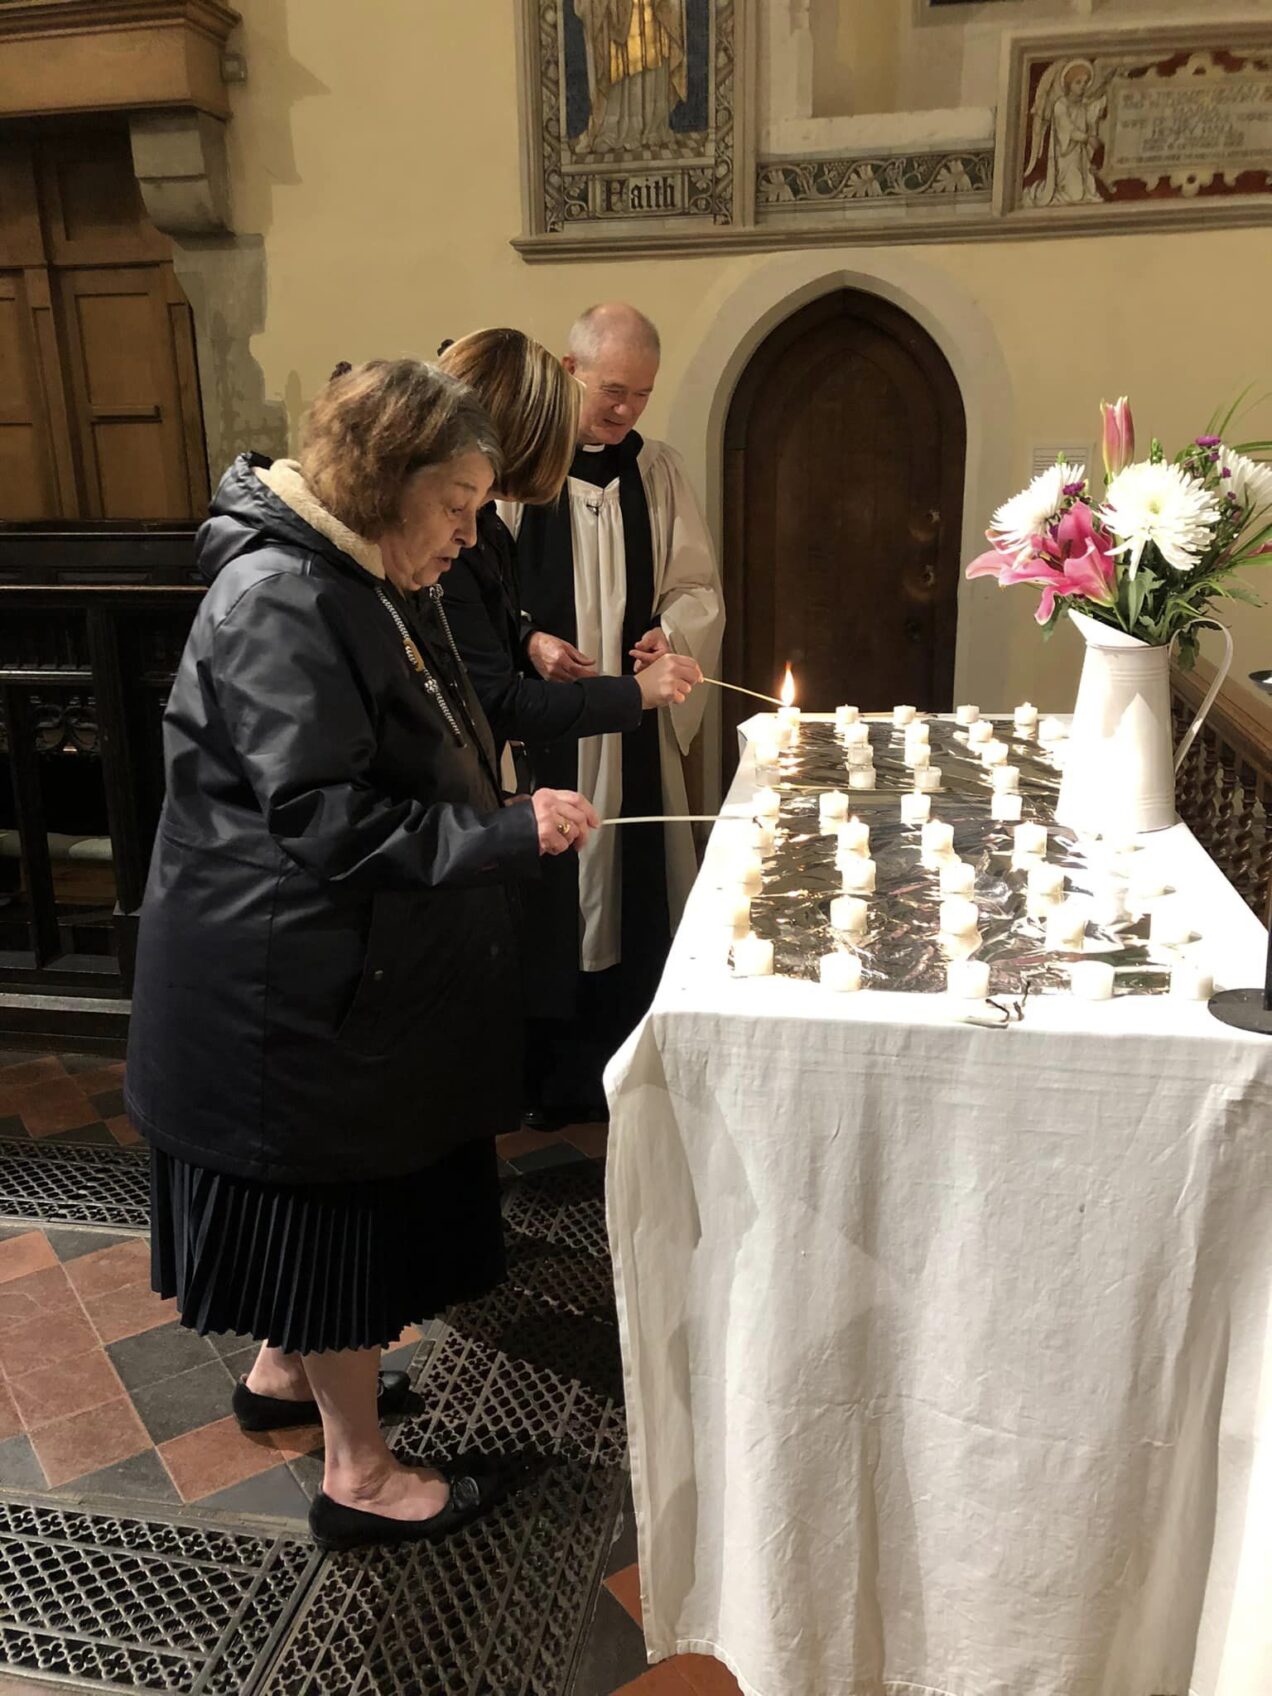 All Souls – Images from around our Diocese